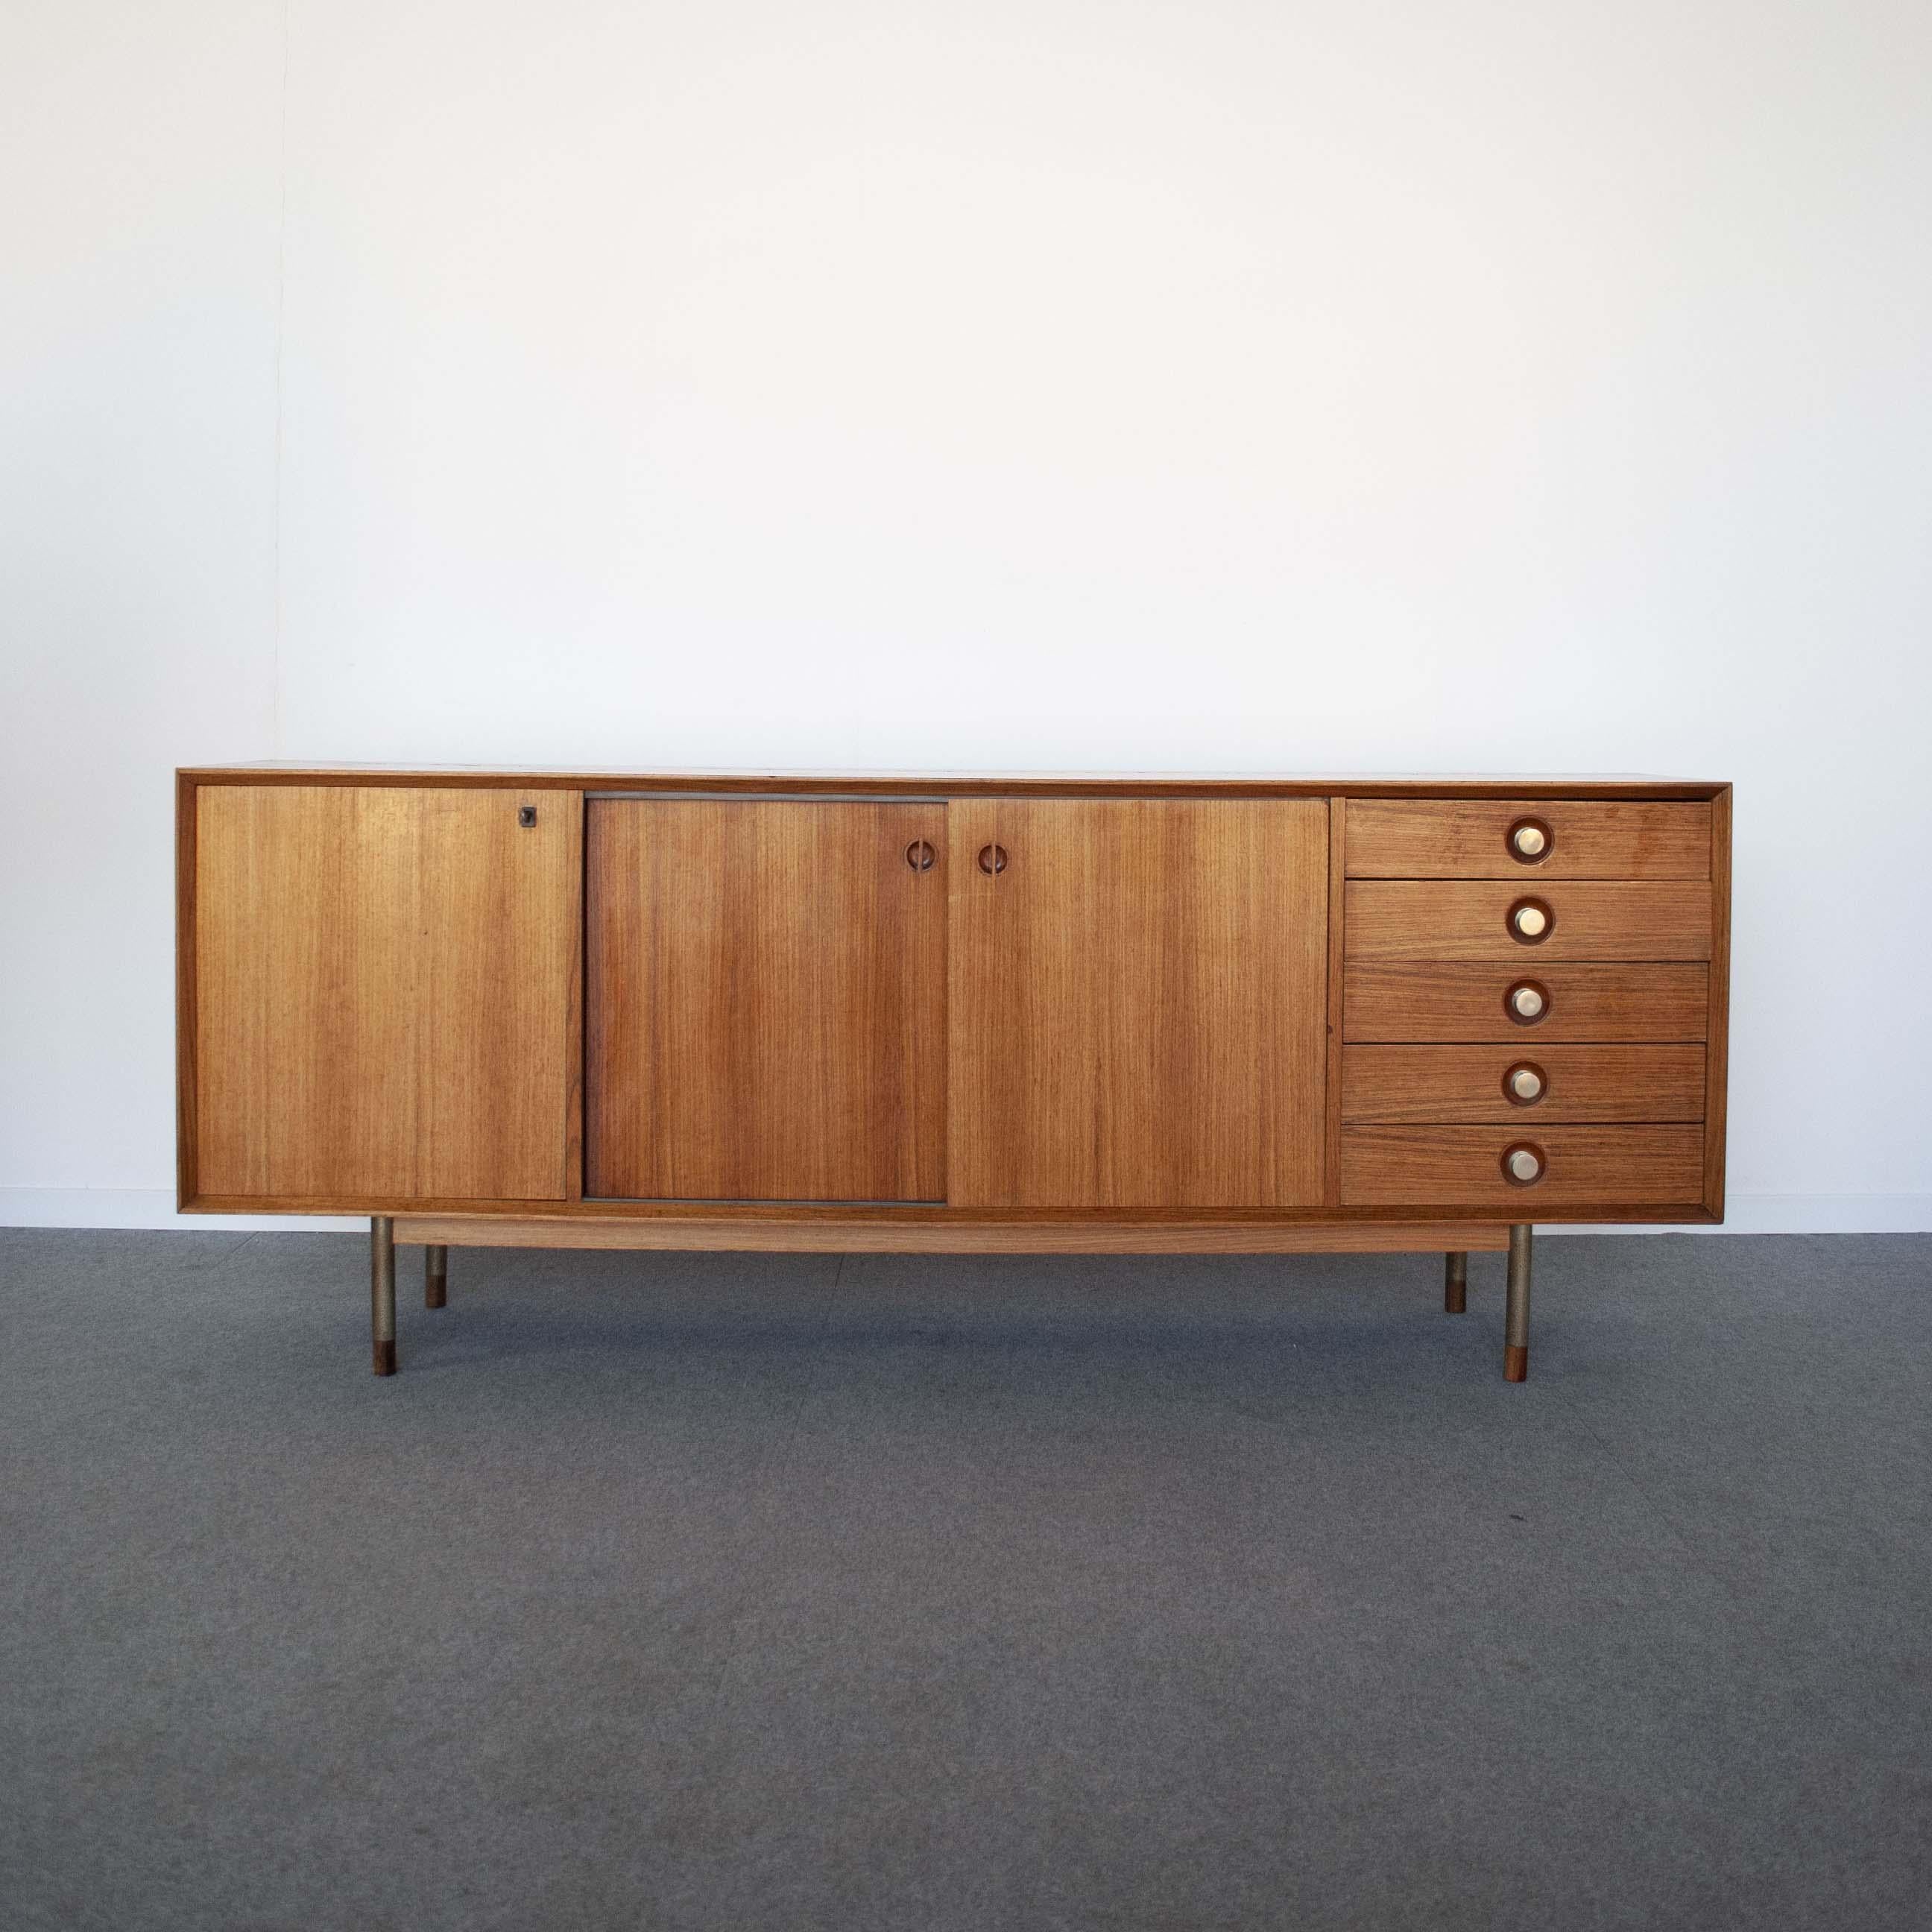 Walnut sideboard composed of four compartments, one with 5 drawers, the other three containing with two sliding doors, designer Georges Nelson, 1960s production.